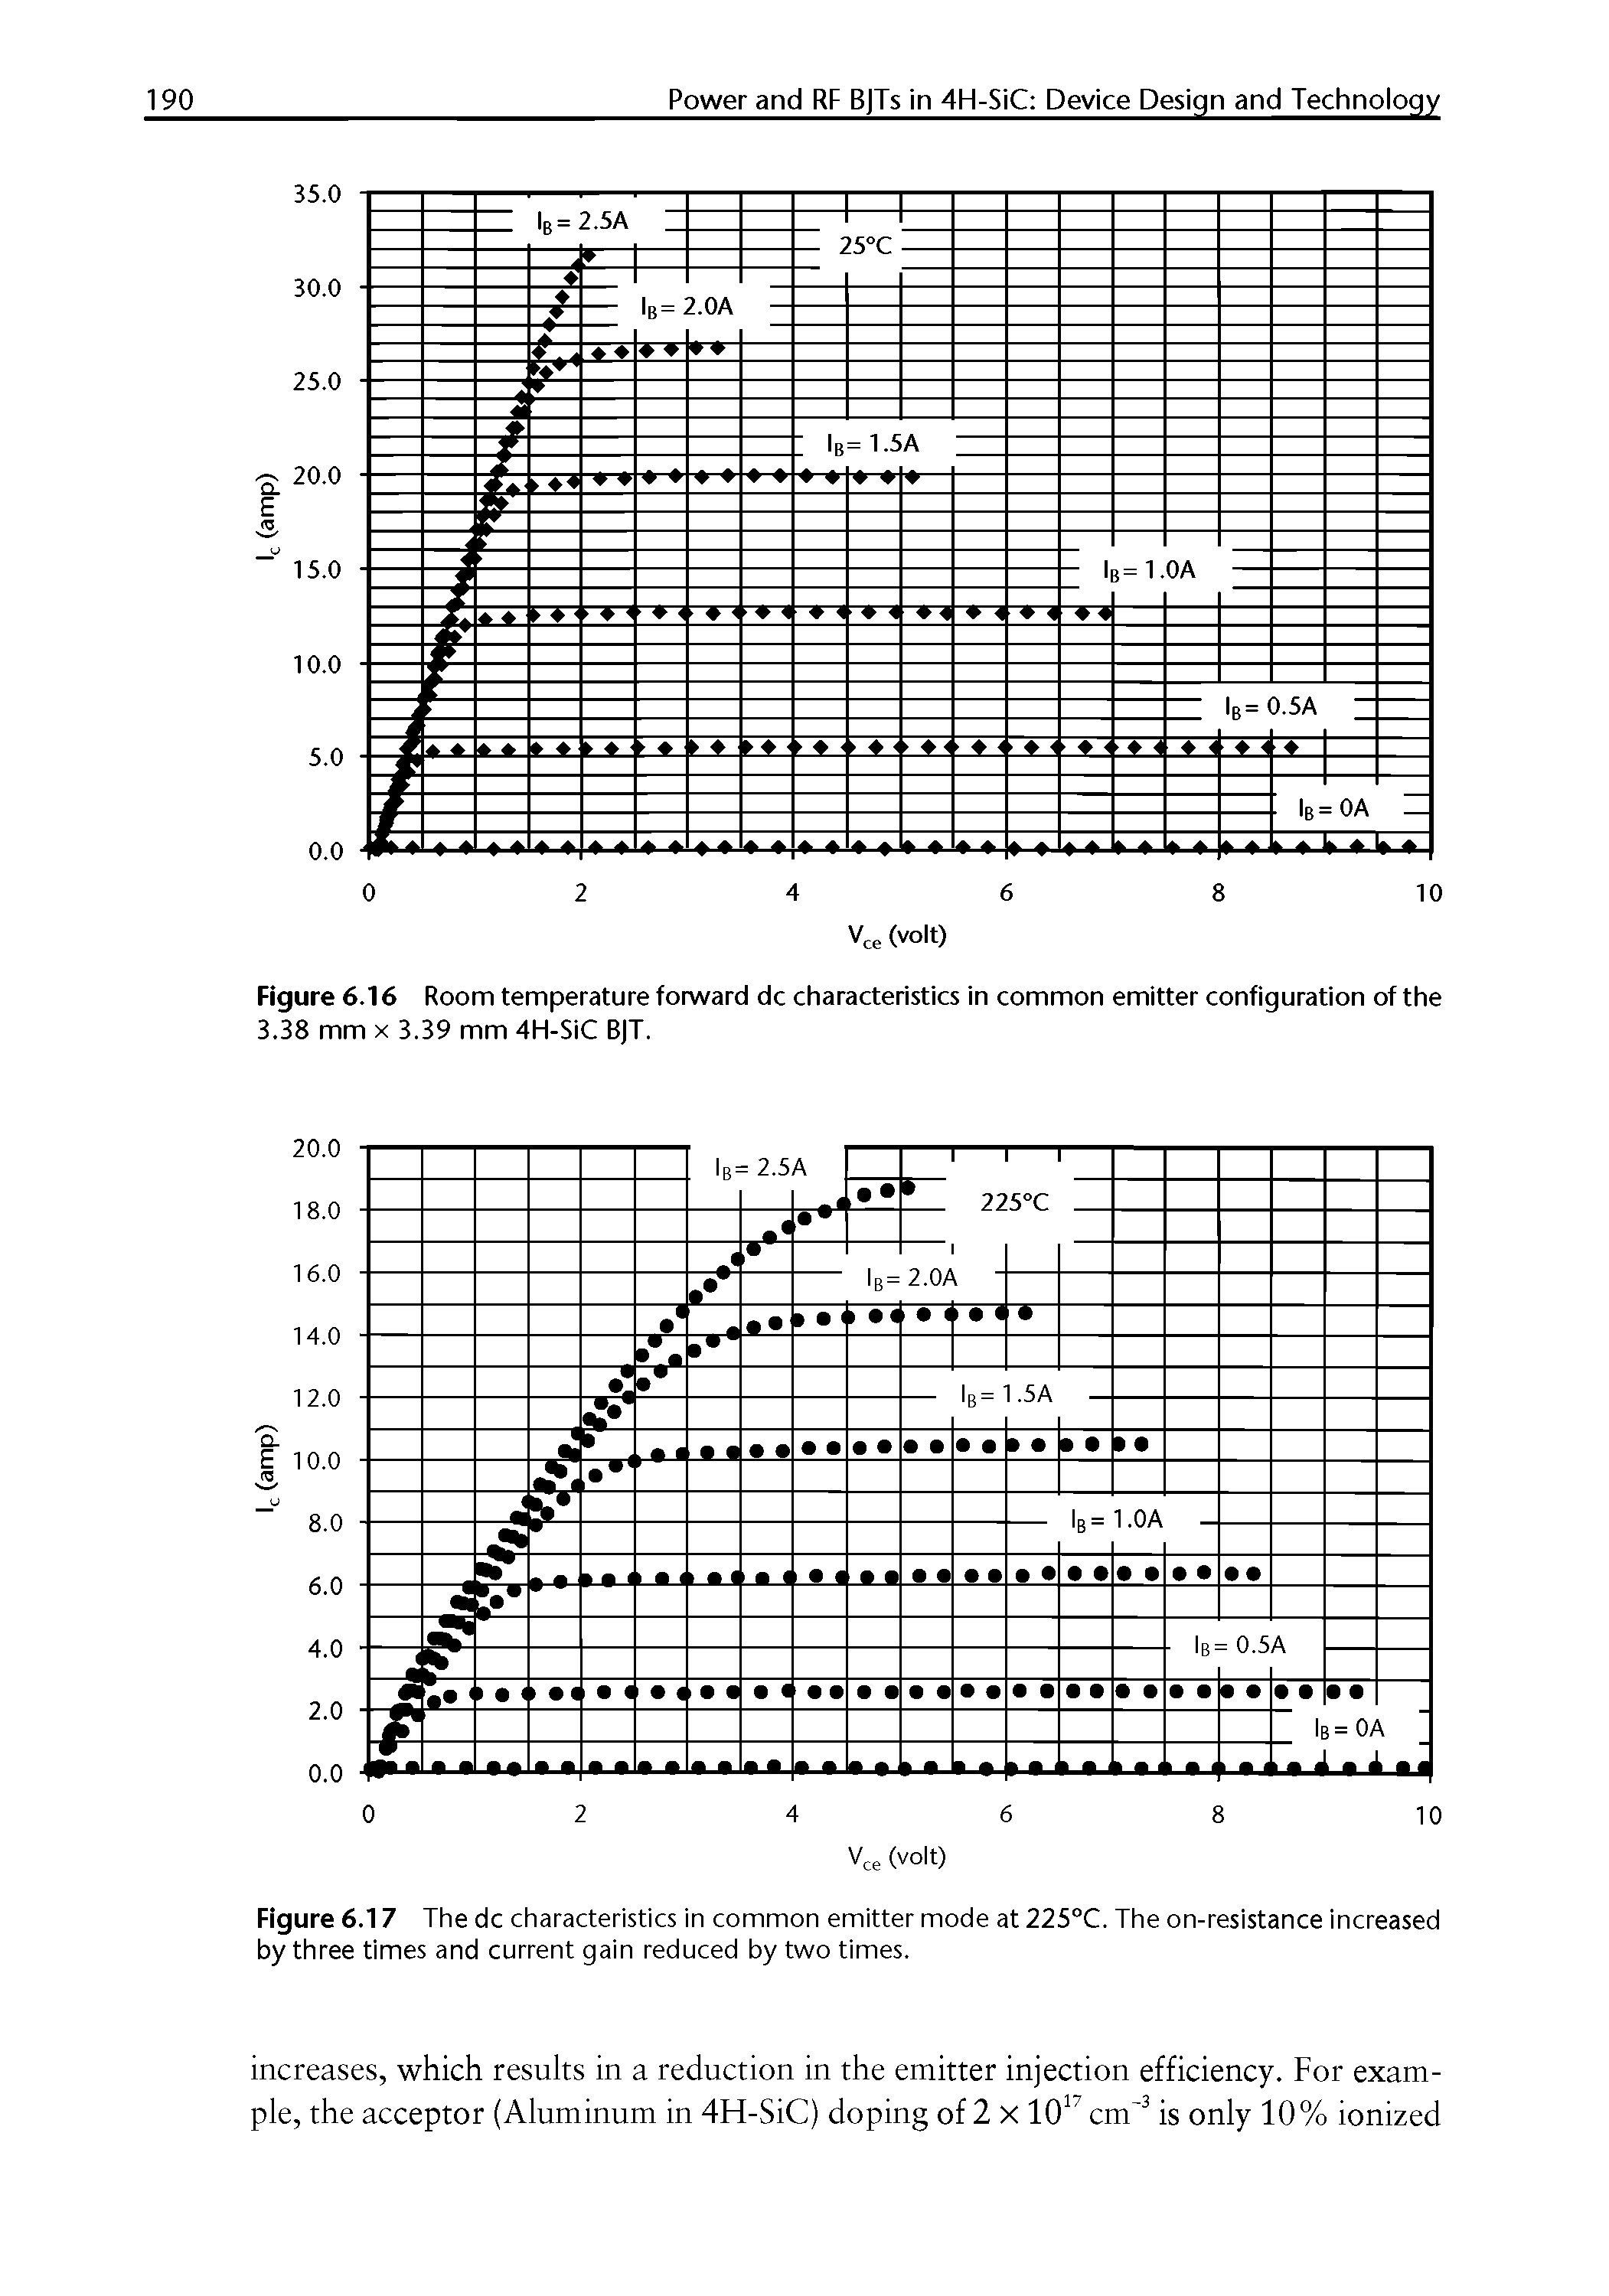 Figure 6.17 The dc characteristics in common emitter mode at 225°C. The on-resistance increased by three times and current gain reduced by two times.